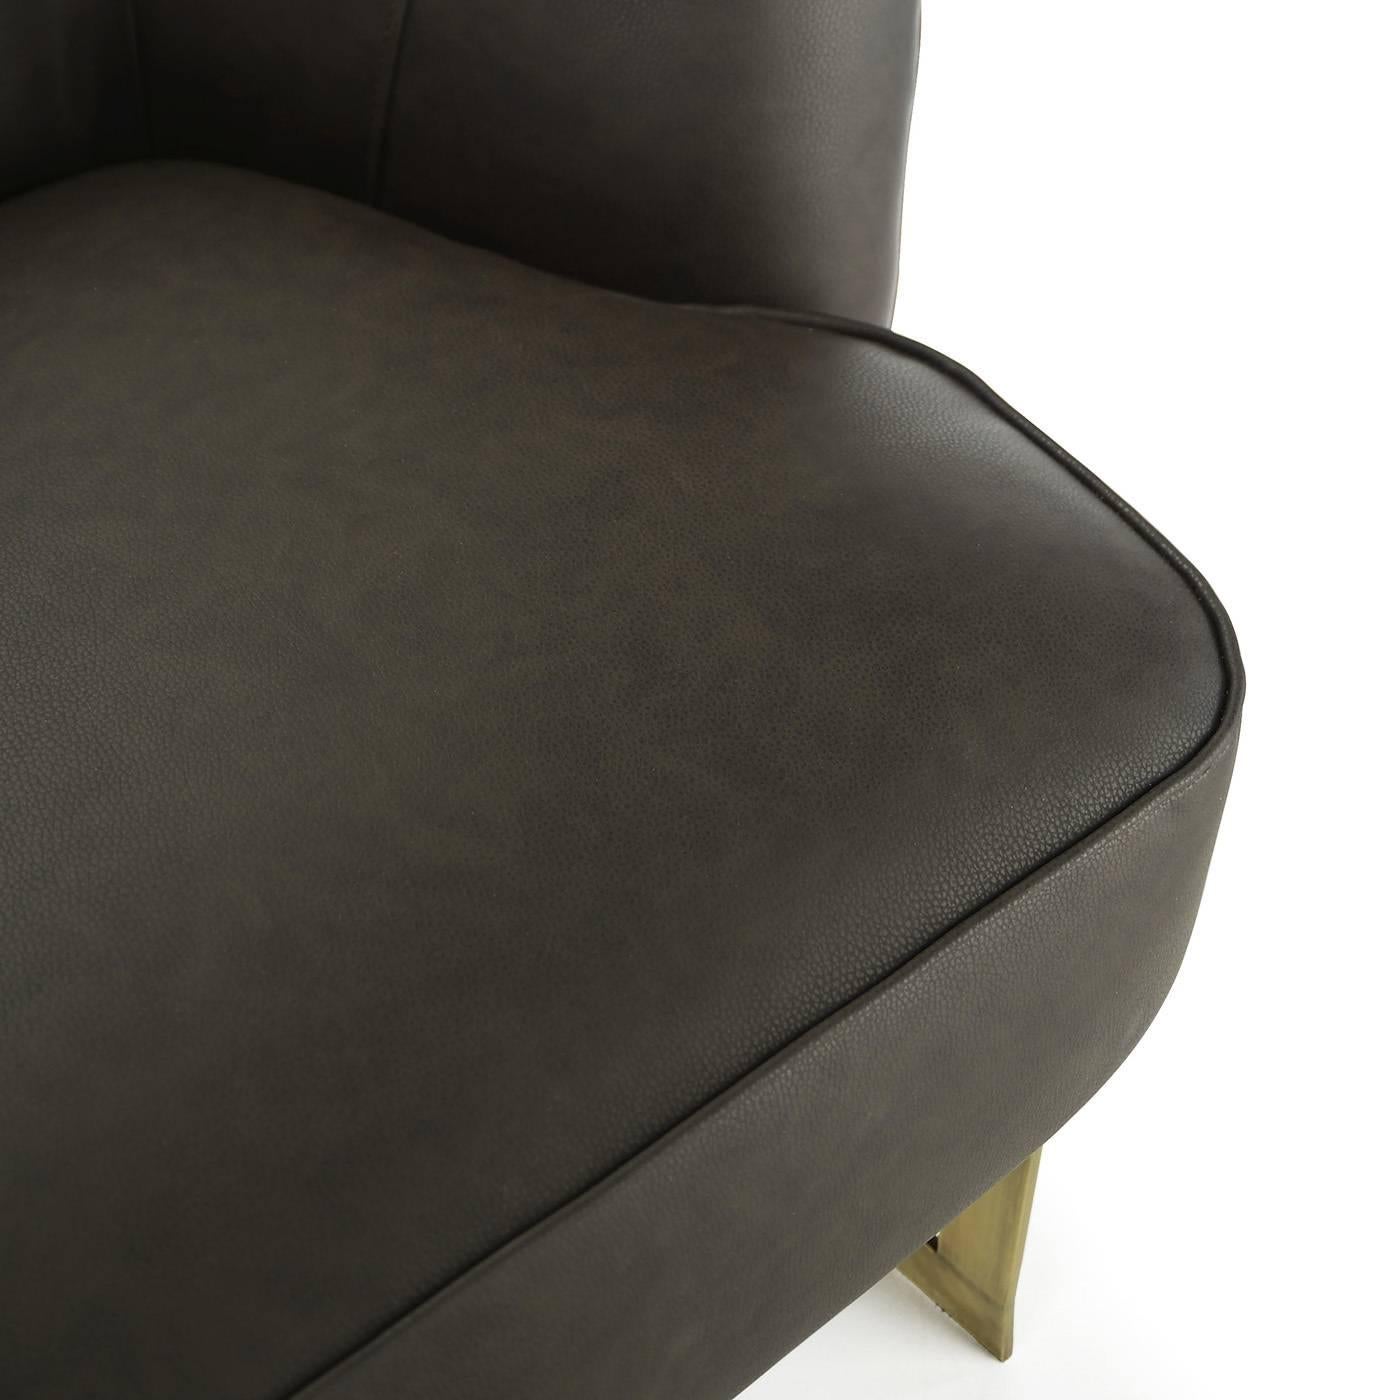 This elegant armchair, designed by Studio 63 for Marioni, features a brass structure and a polyurethane padding. It is available in different upholstery. In this configuration the cover is in dark brown leather .